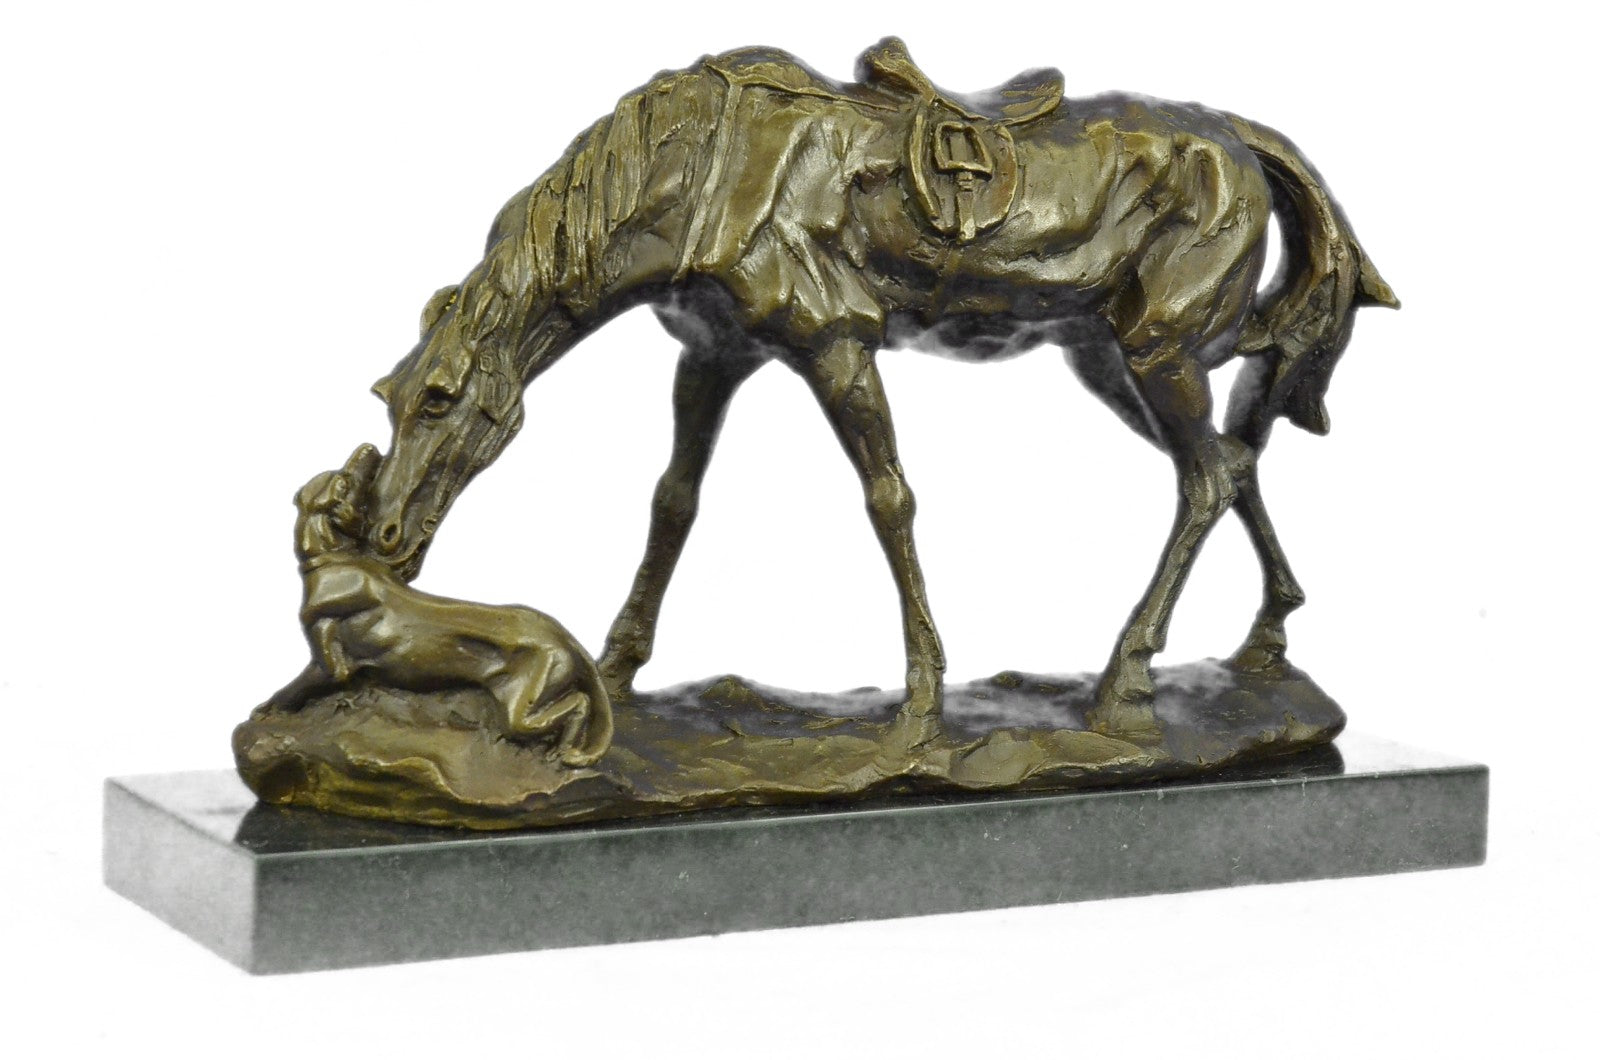 Art Deco Hand Made by Lost Wax Method Friendship Between Dog and Horse Bronze